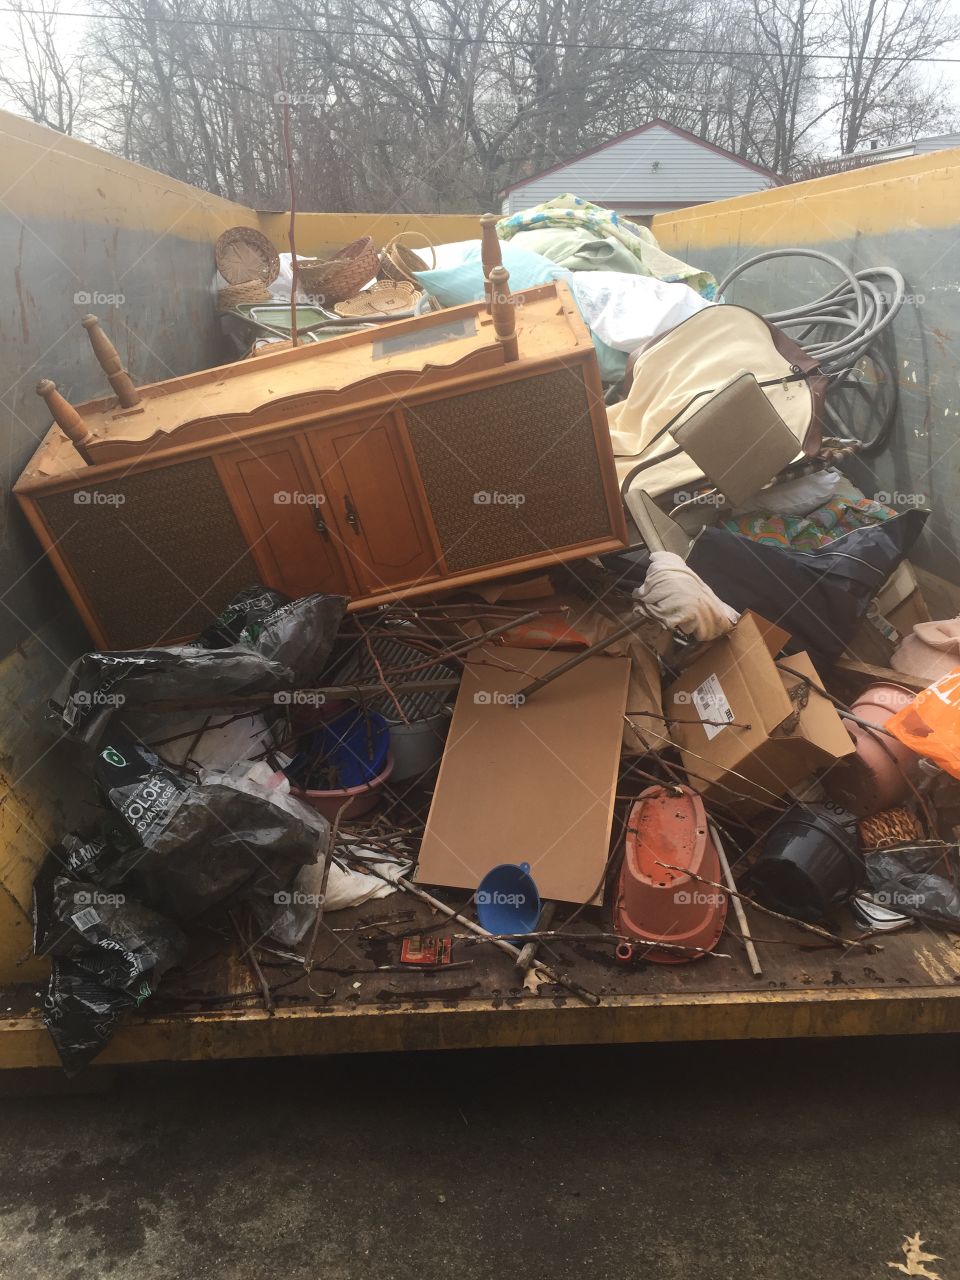 Picture of contents of dumpster after emptying moms house when she moved to an apartments 